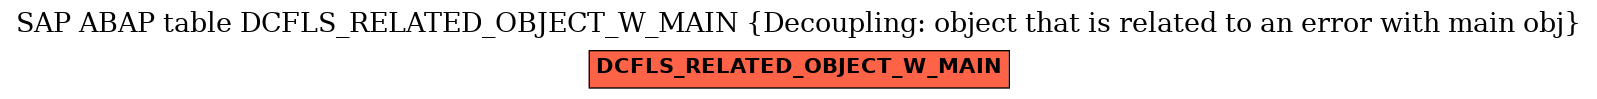 E-R Diagram for table DCFLS_RELATED_OBJECT_W_MAIN (Decoupling: object that is related to an error with main obj)